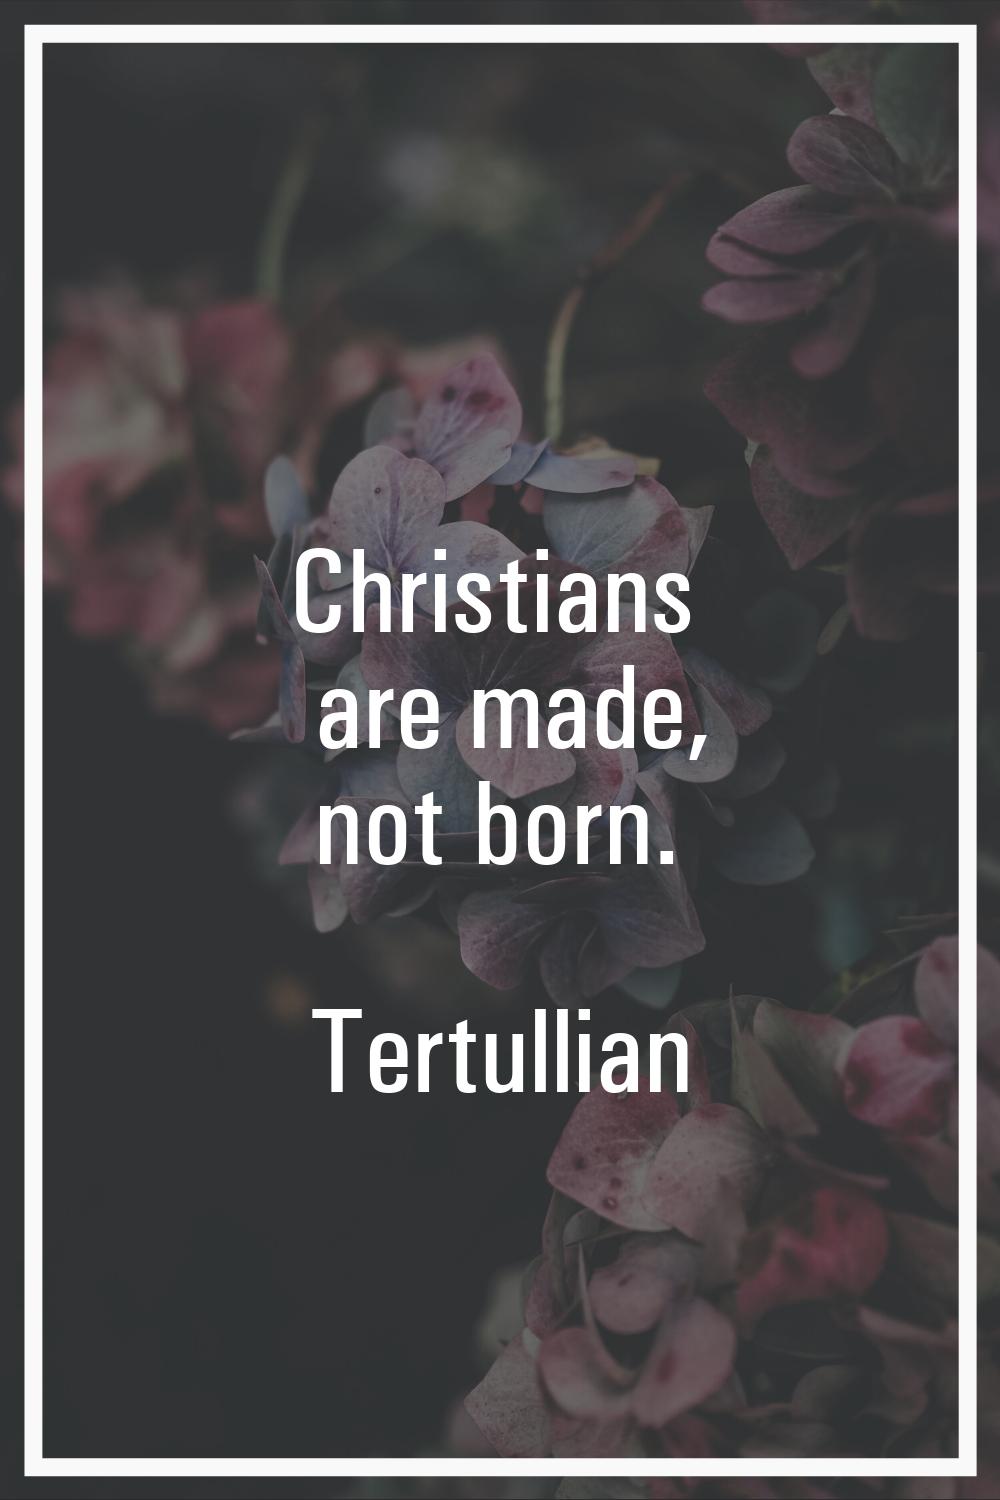 Christians are made, not born.